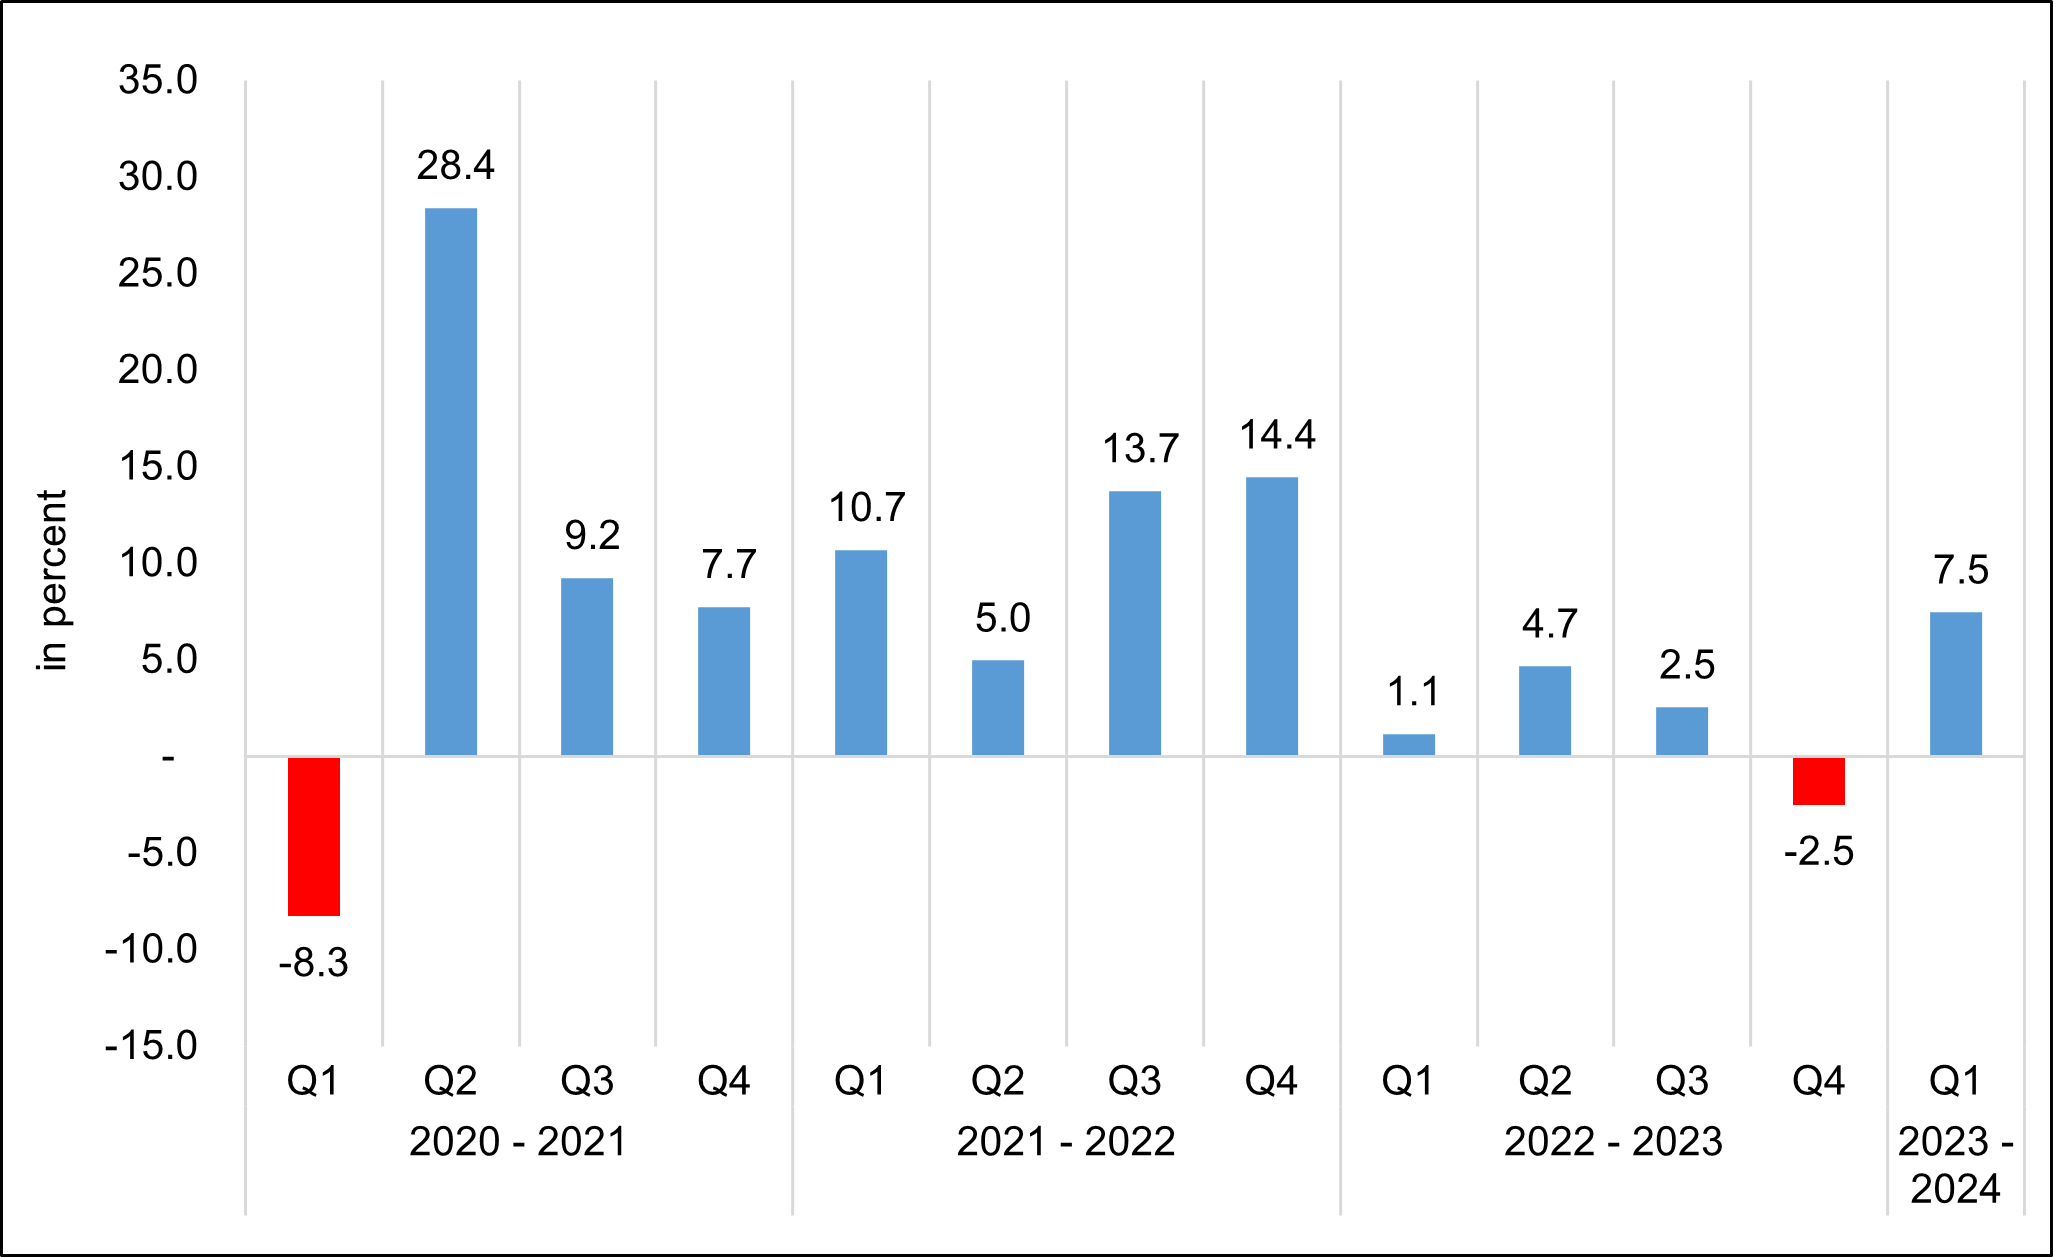 Figure 8. Exports of Goods and Services, Q1 2021 to Q1 2024 Growth Rates, At Constant 2018 Prices 